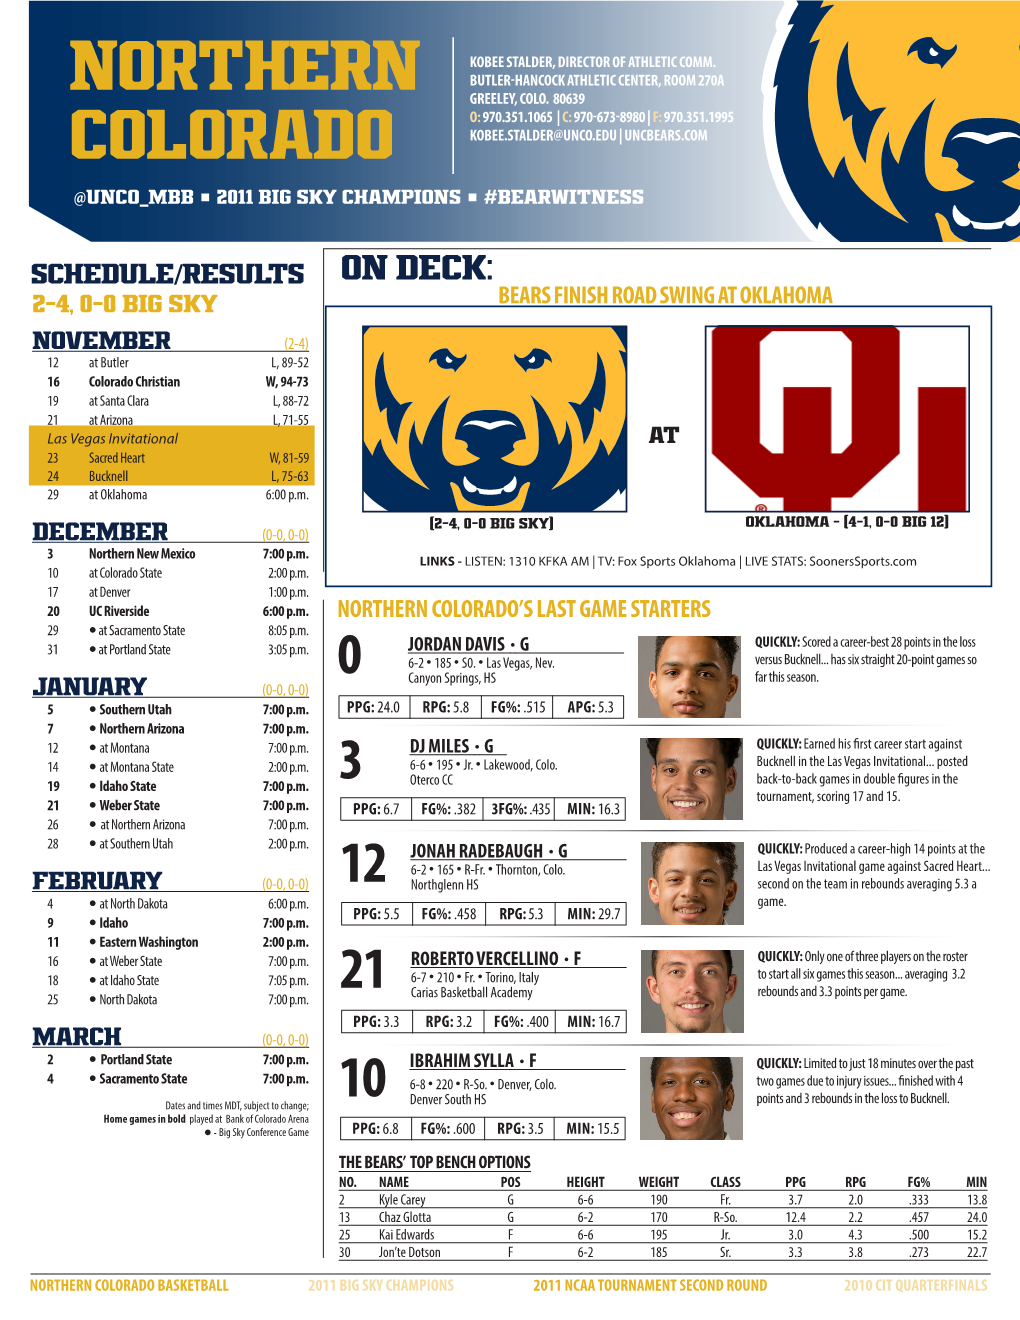 NORTHERN COLORADO’S LAST GAME STARTERS 29 L at Sacramento State 8:05 P.M